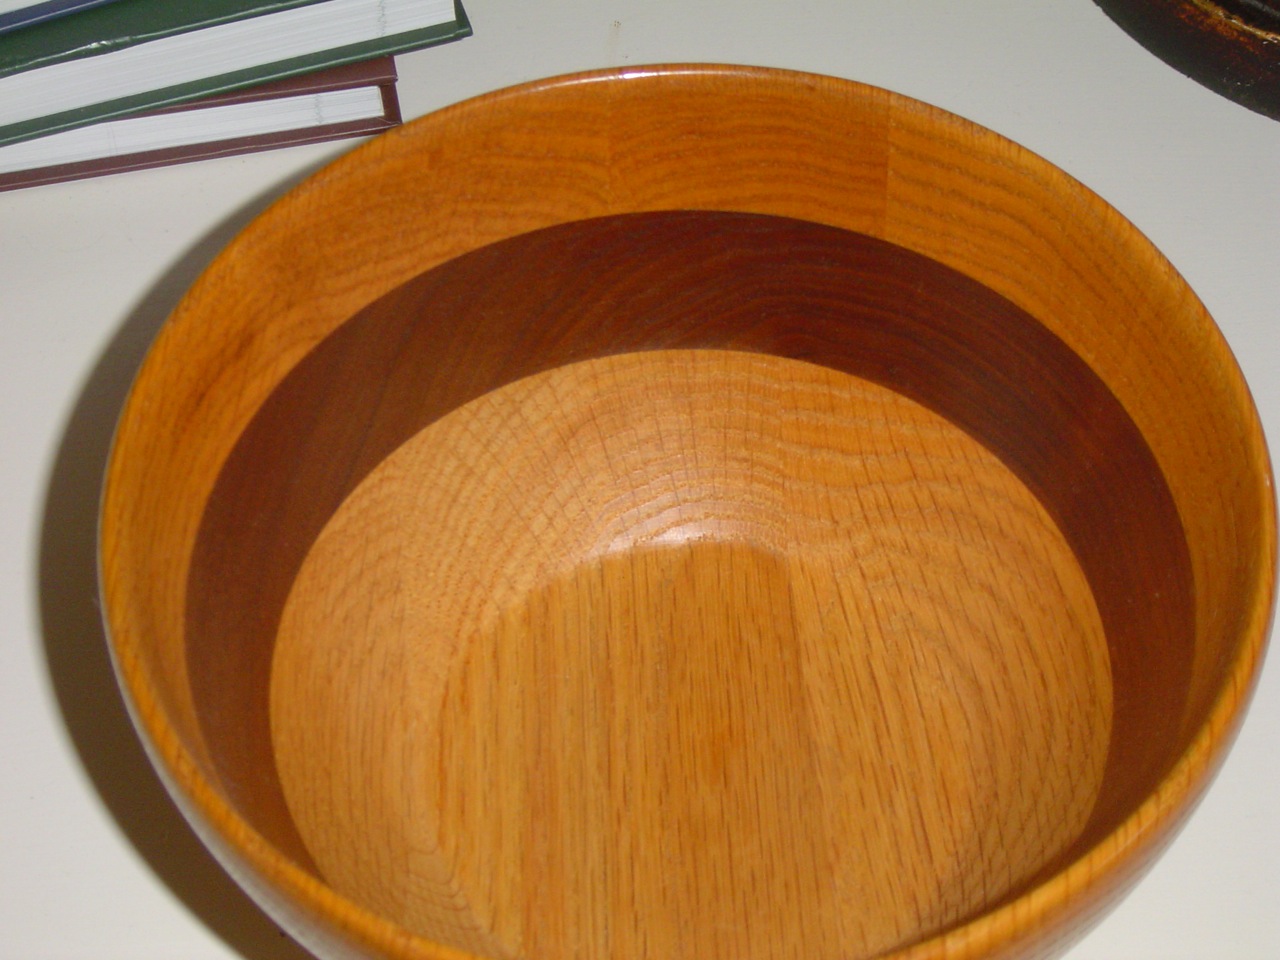 Bowl wish I could say I made it but made by my 80 year old father